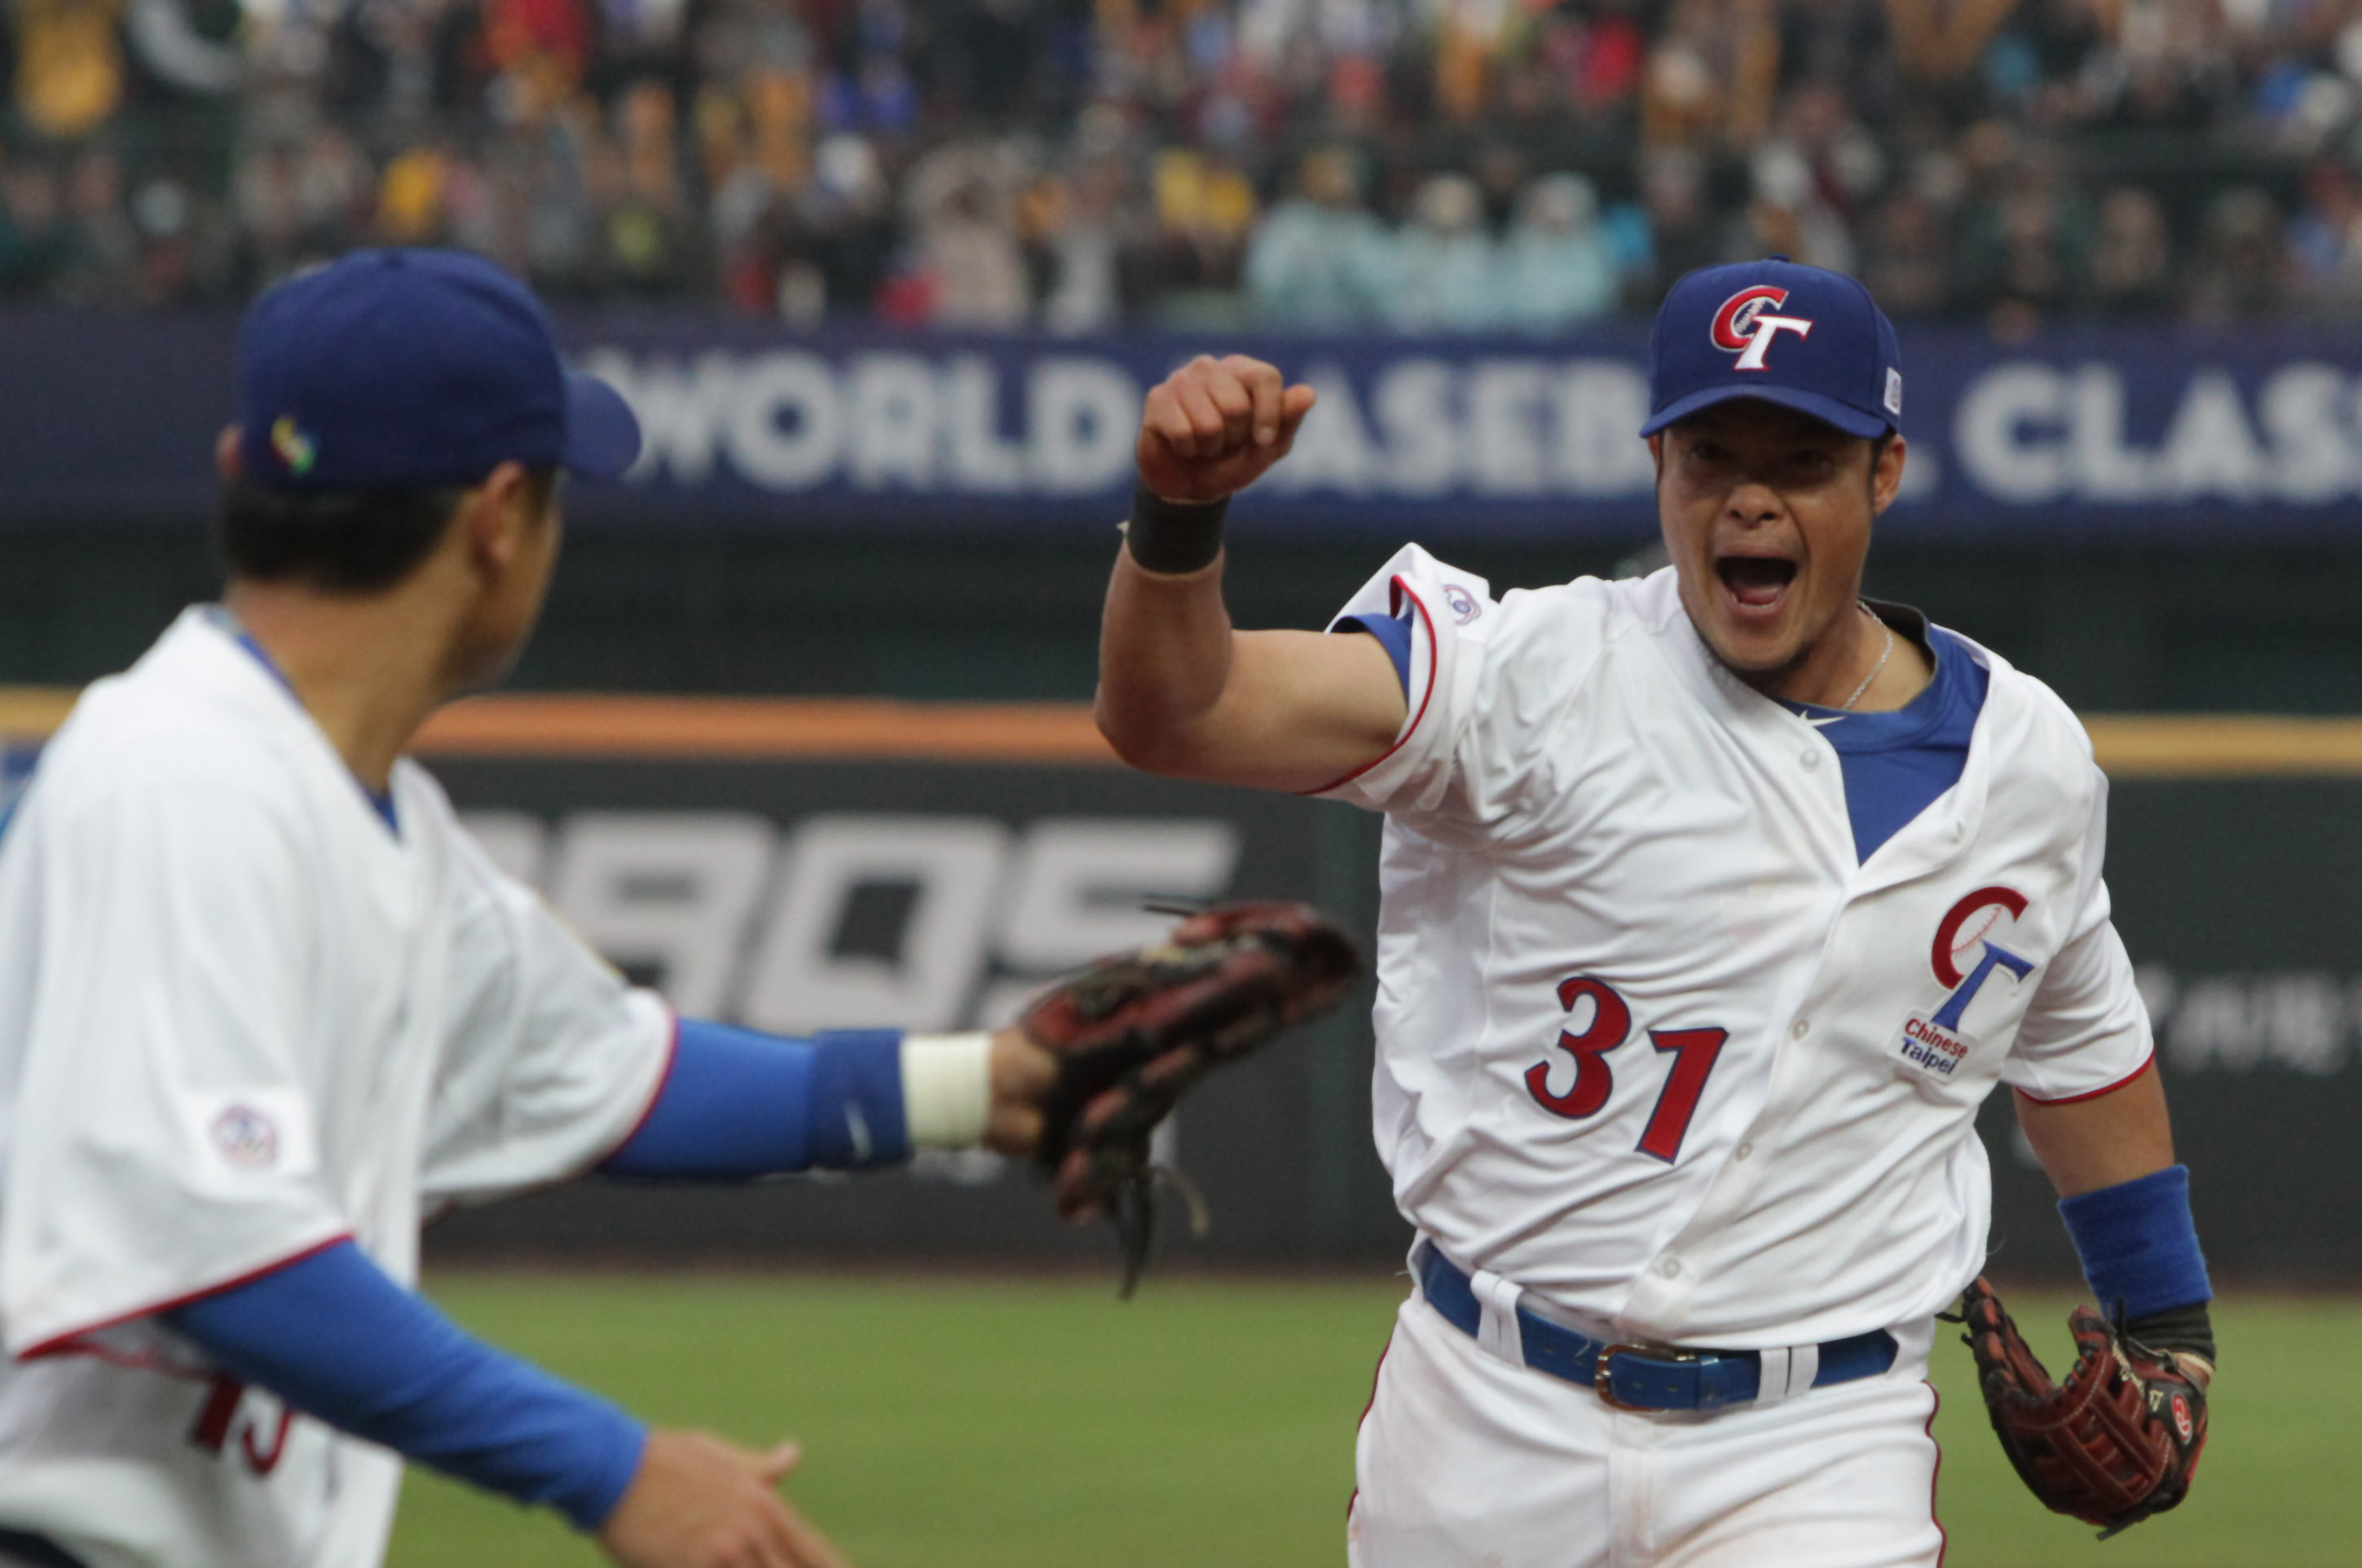 Opinion: How the World Baseball Classic could reverberate in China and  beyond